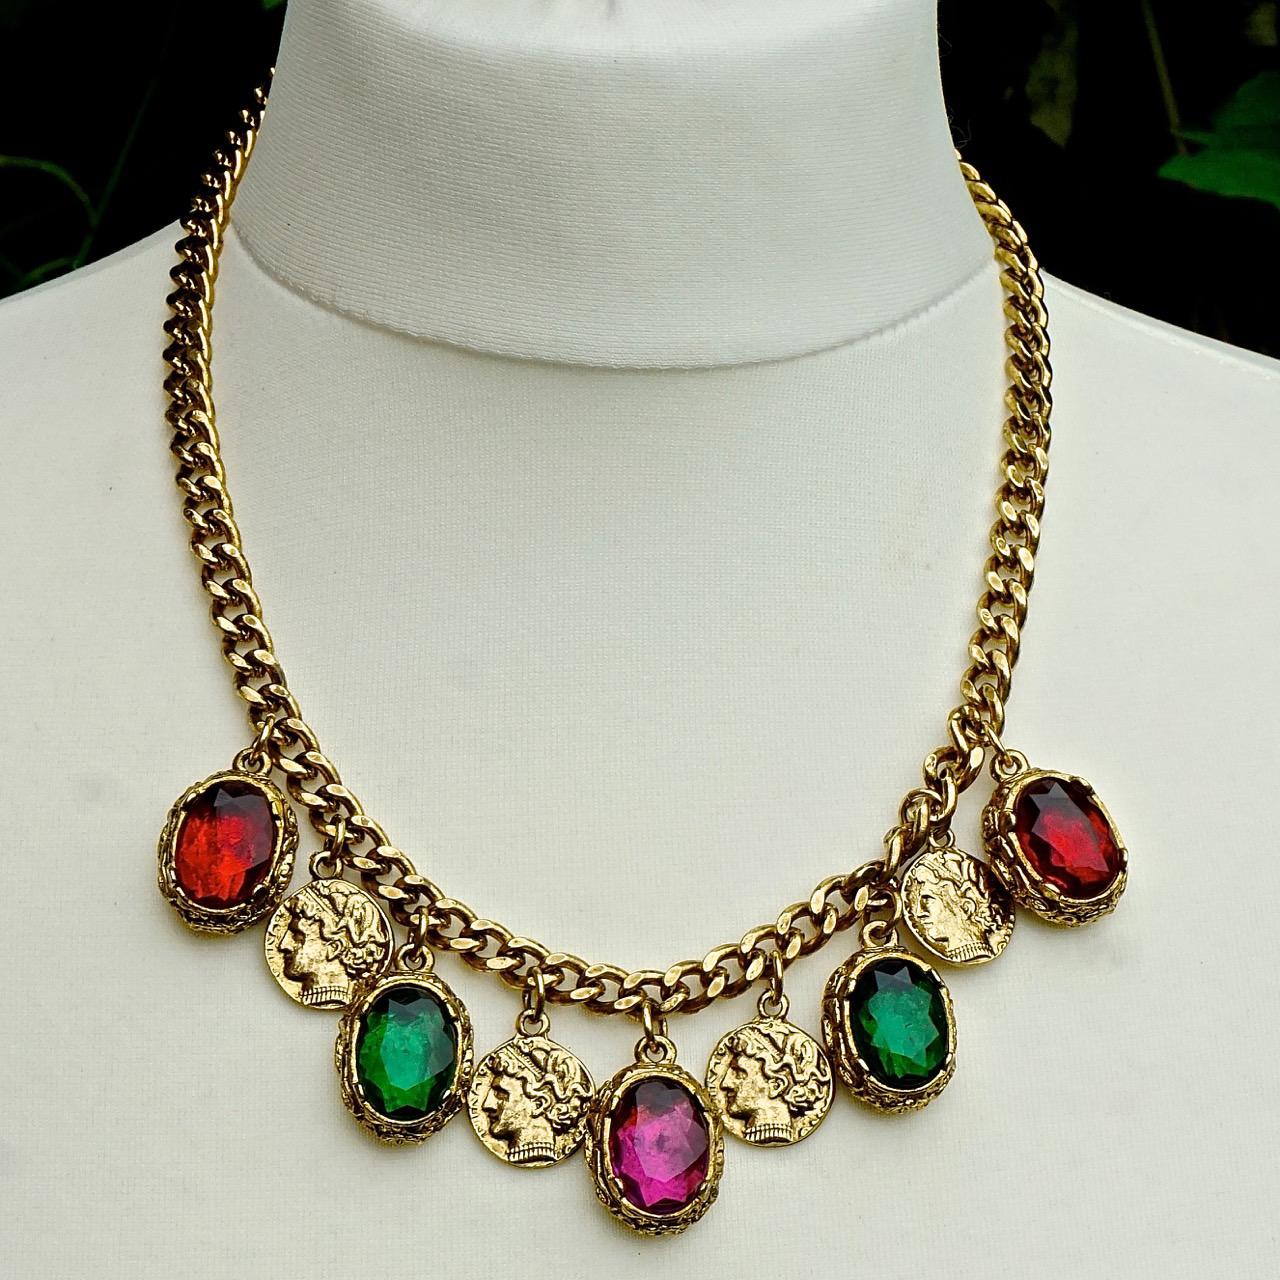 Gold Plated Curb Chain Necklace with Glass Jewel and Coin Drops, circa 1980s For Sale 3